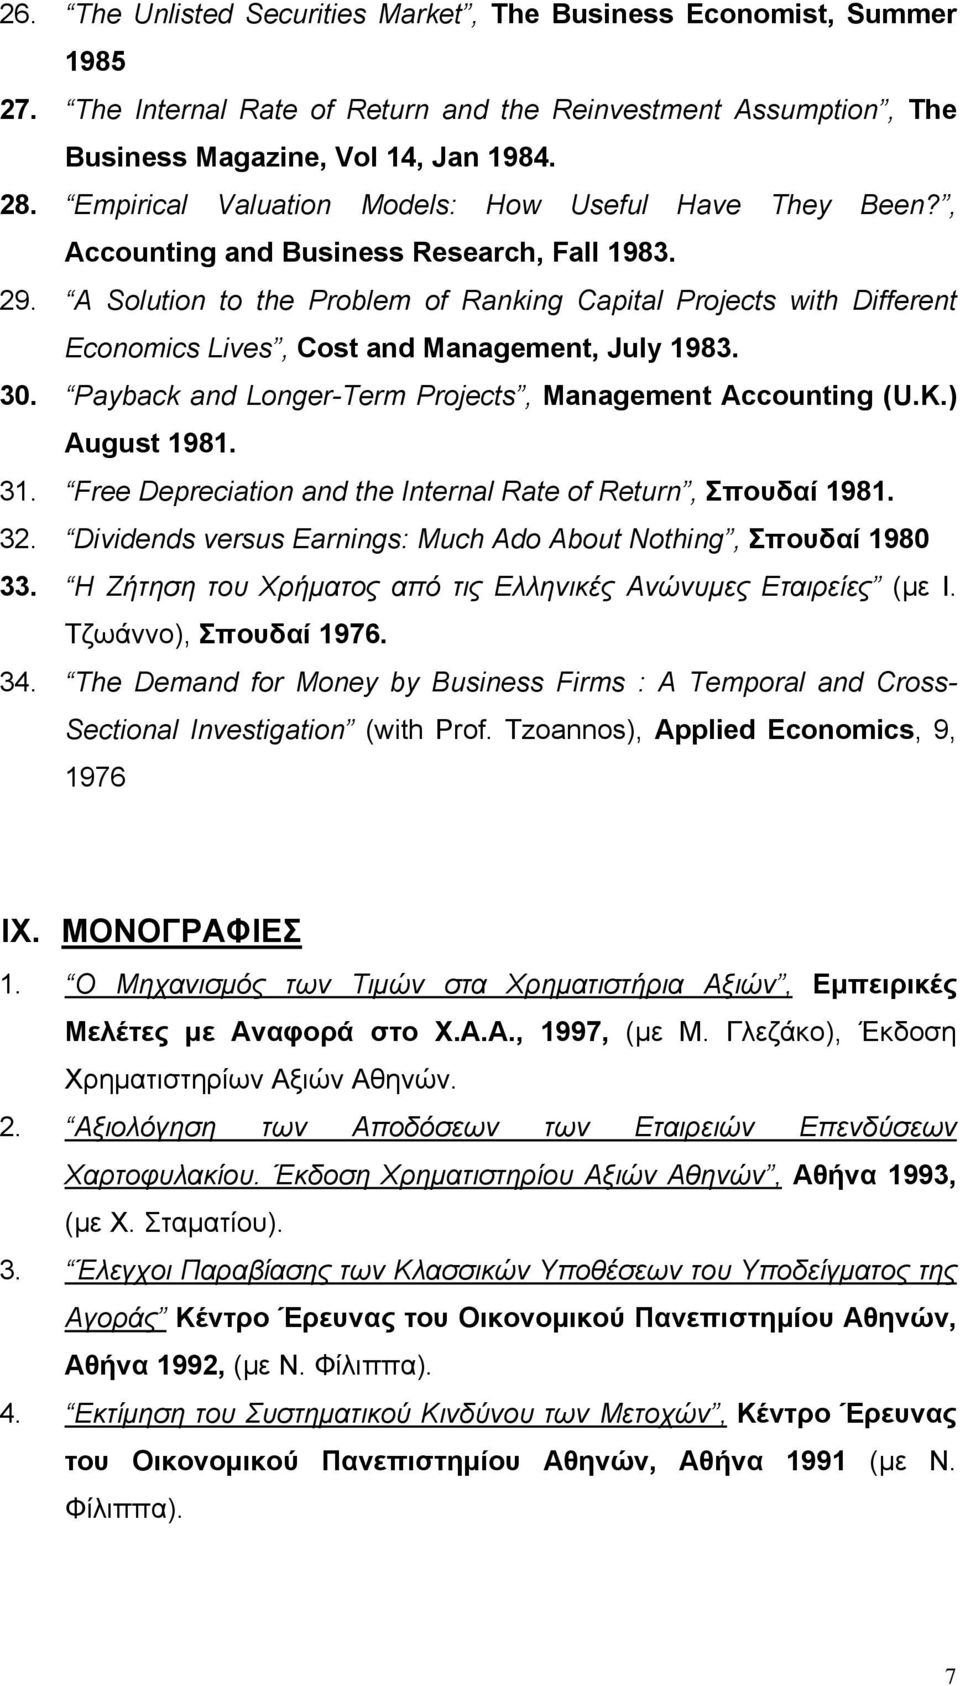 A Solution to the Problem of Ranking Capital Projects with Different Economics Lives, Cost and Management, July 1983. 30. Payback and Longer-Term Projects, Management Accounting (U.K.) August 1981.